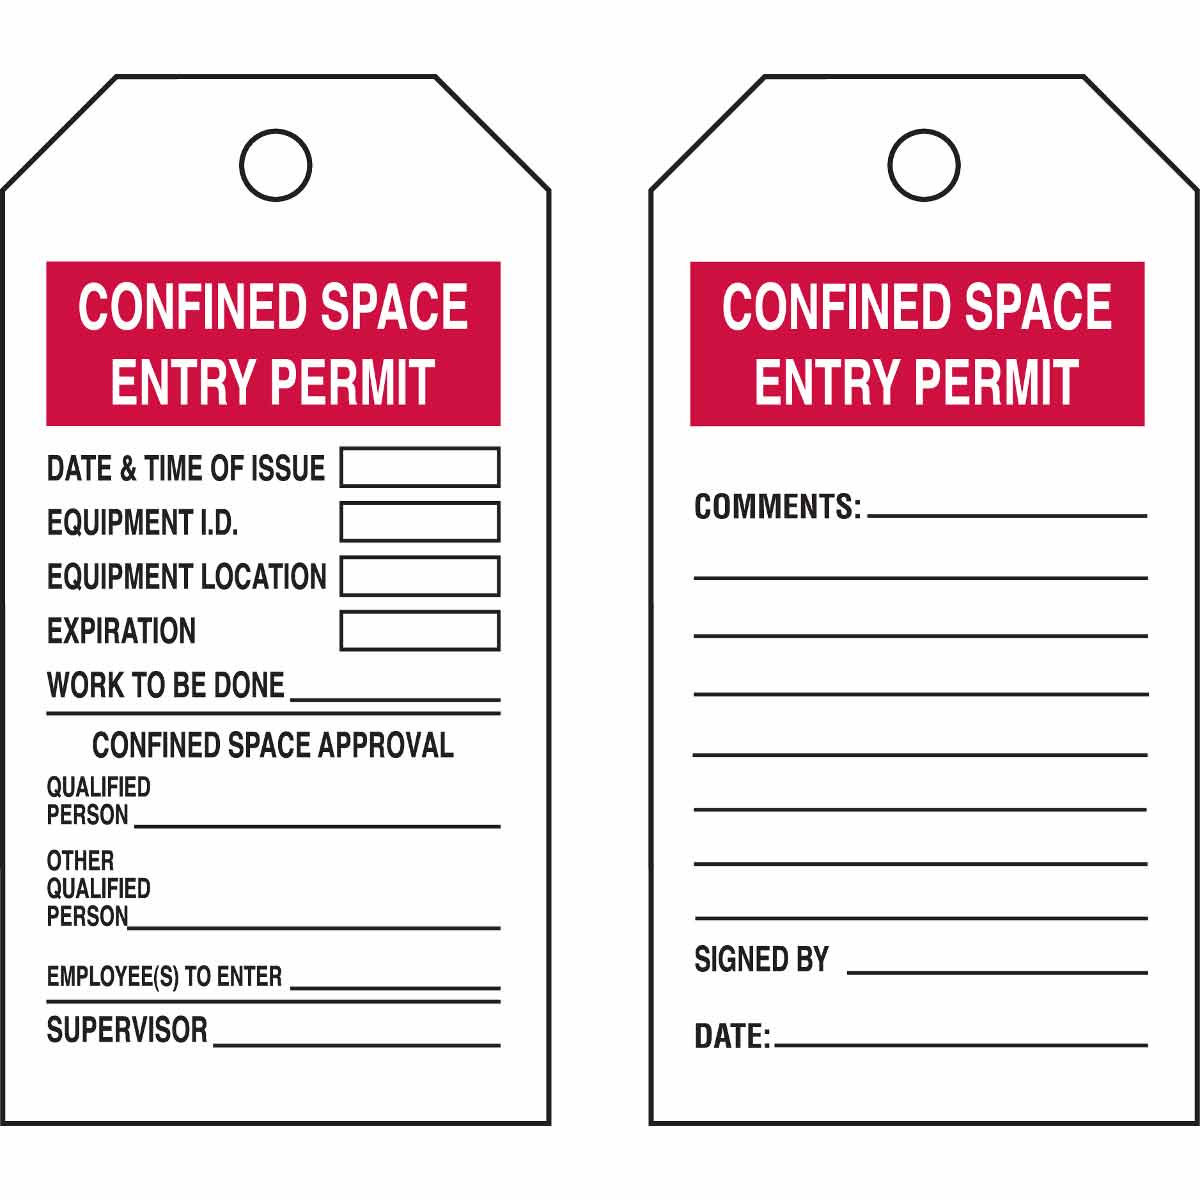 LegendPermit-Required Confined Space Do Not Enter Brady 87768 5 Width X 3-1/2 Height B-302 Polyester HeaderDanger Black and Red on White Confined Space Sign